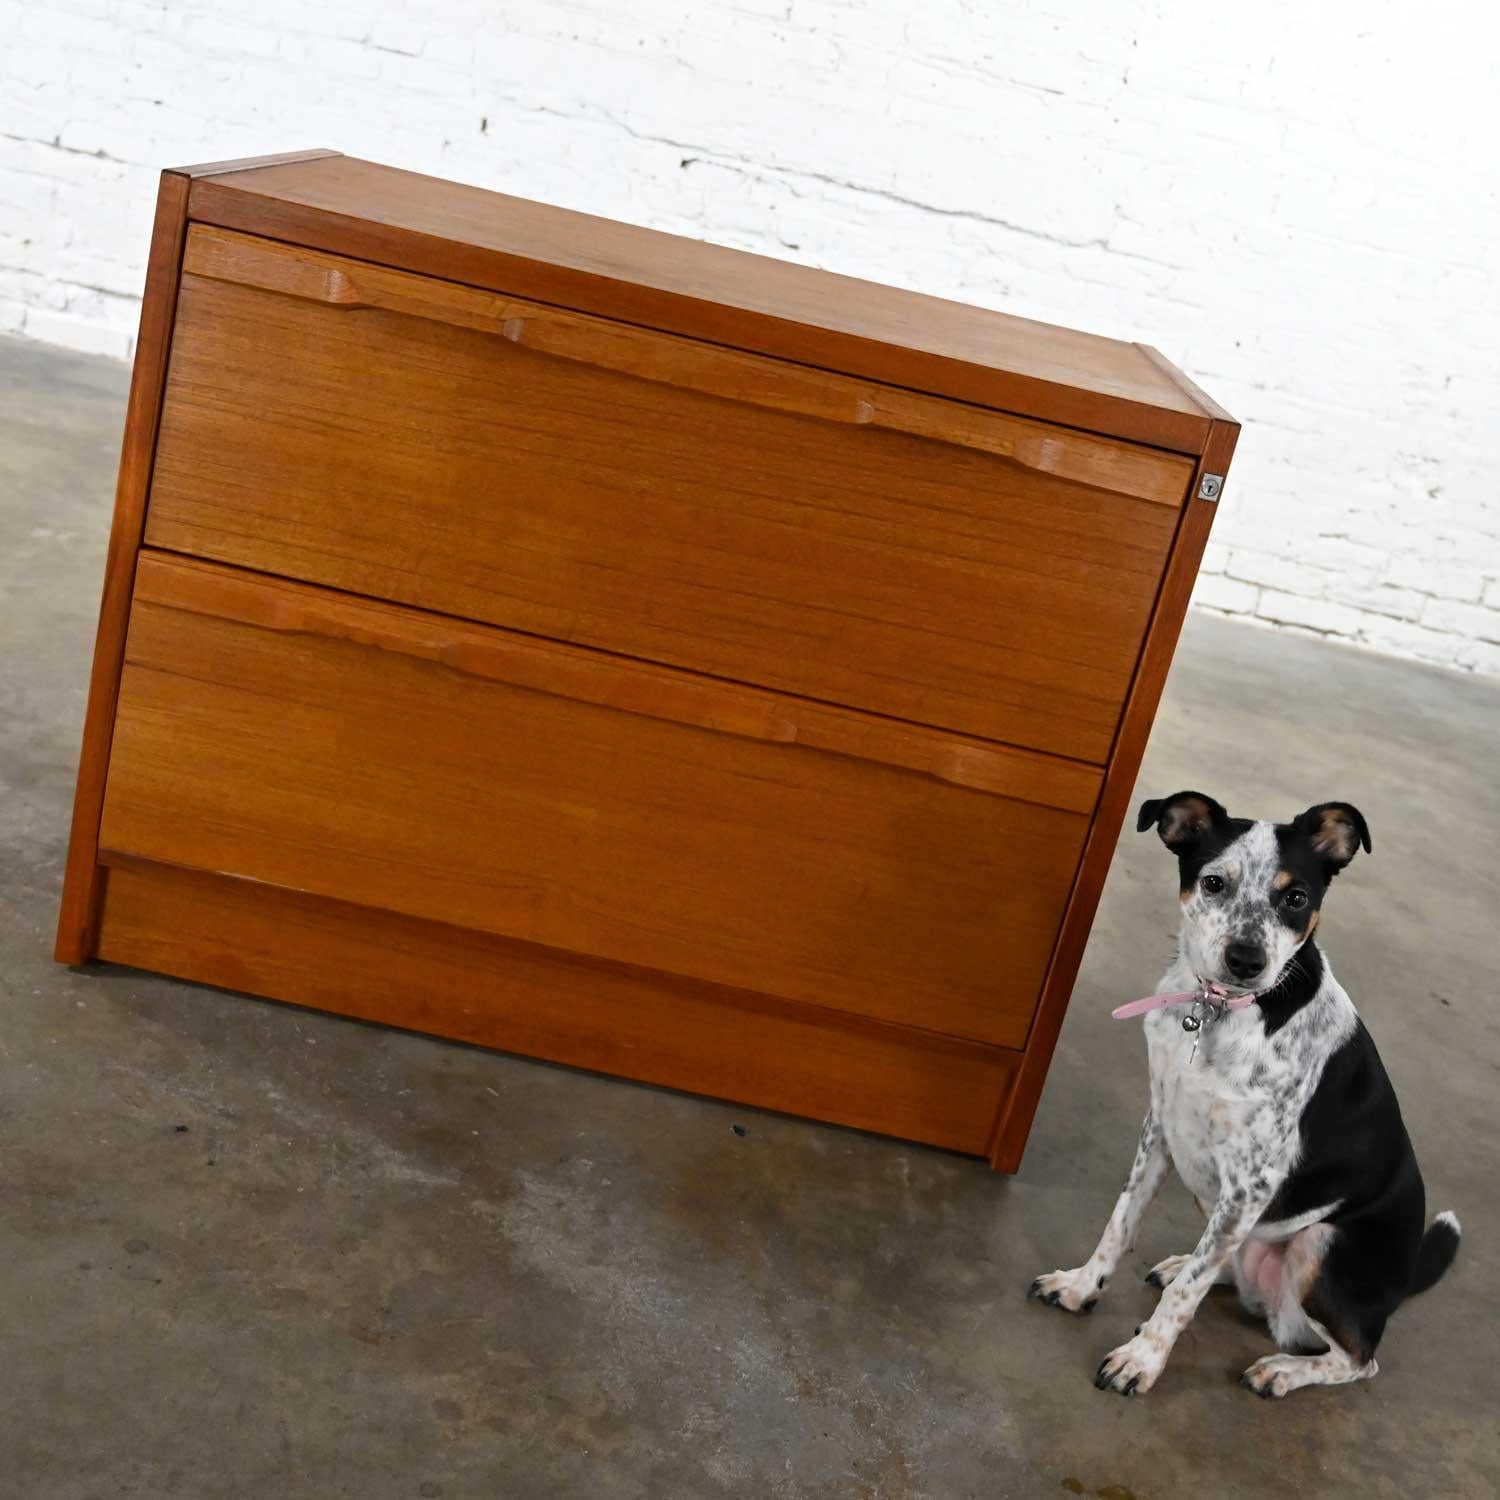 Handsome vintage Scandinavian Modern teak veneer lateral locking file or console cabinet with solid teak handles. Beautiful condition, keeping in mind that this is vintage and not new so will have signs of use and wear. This cabinet has been